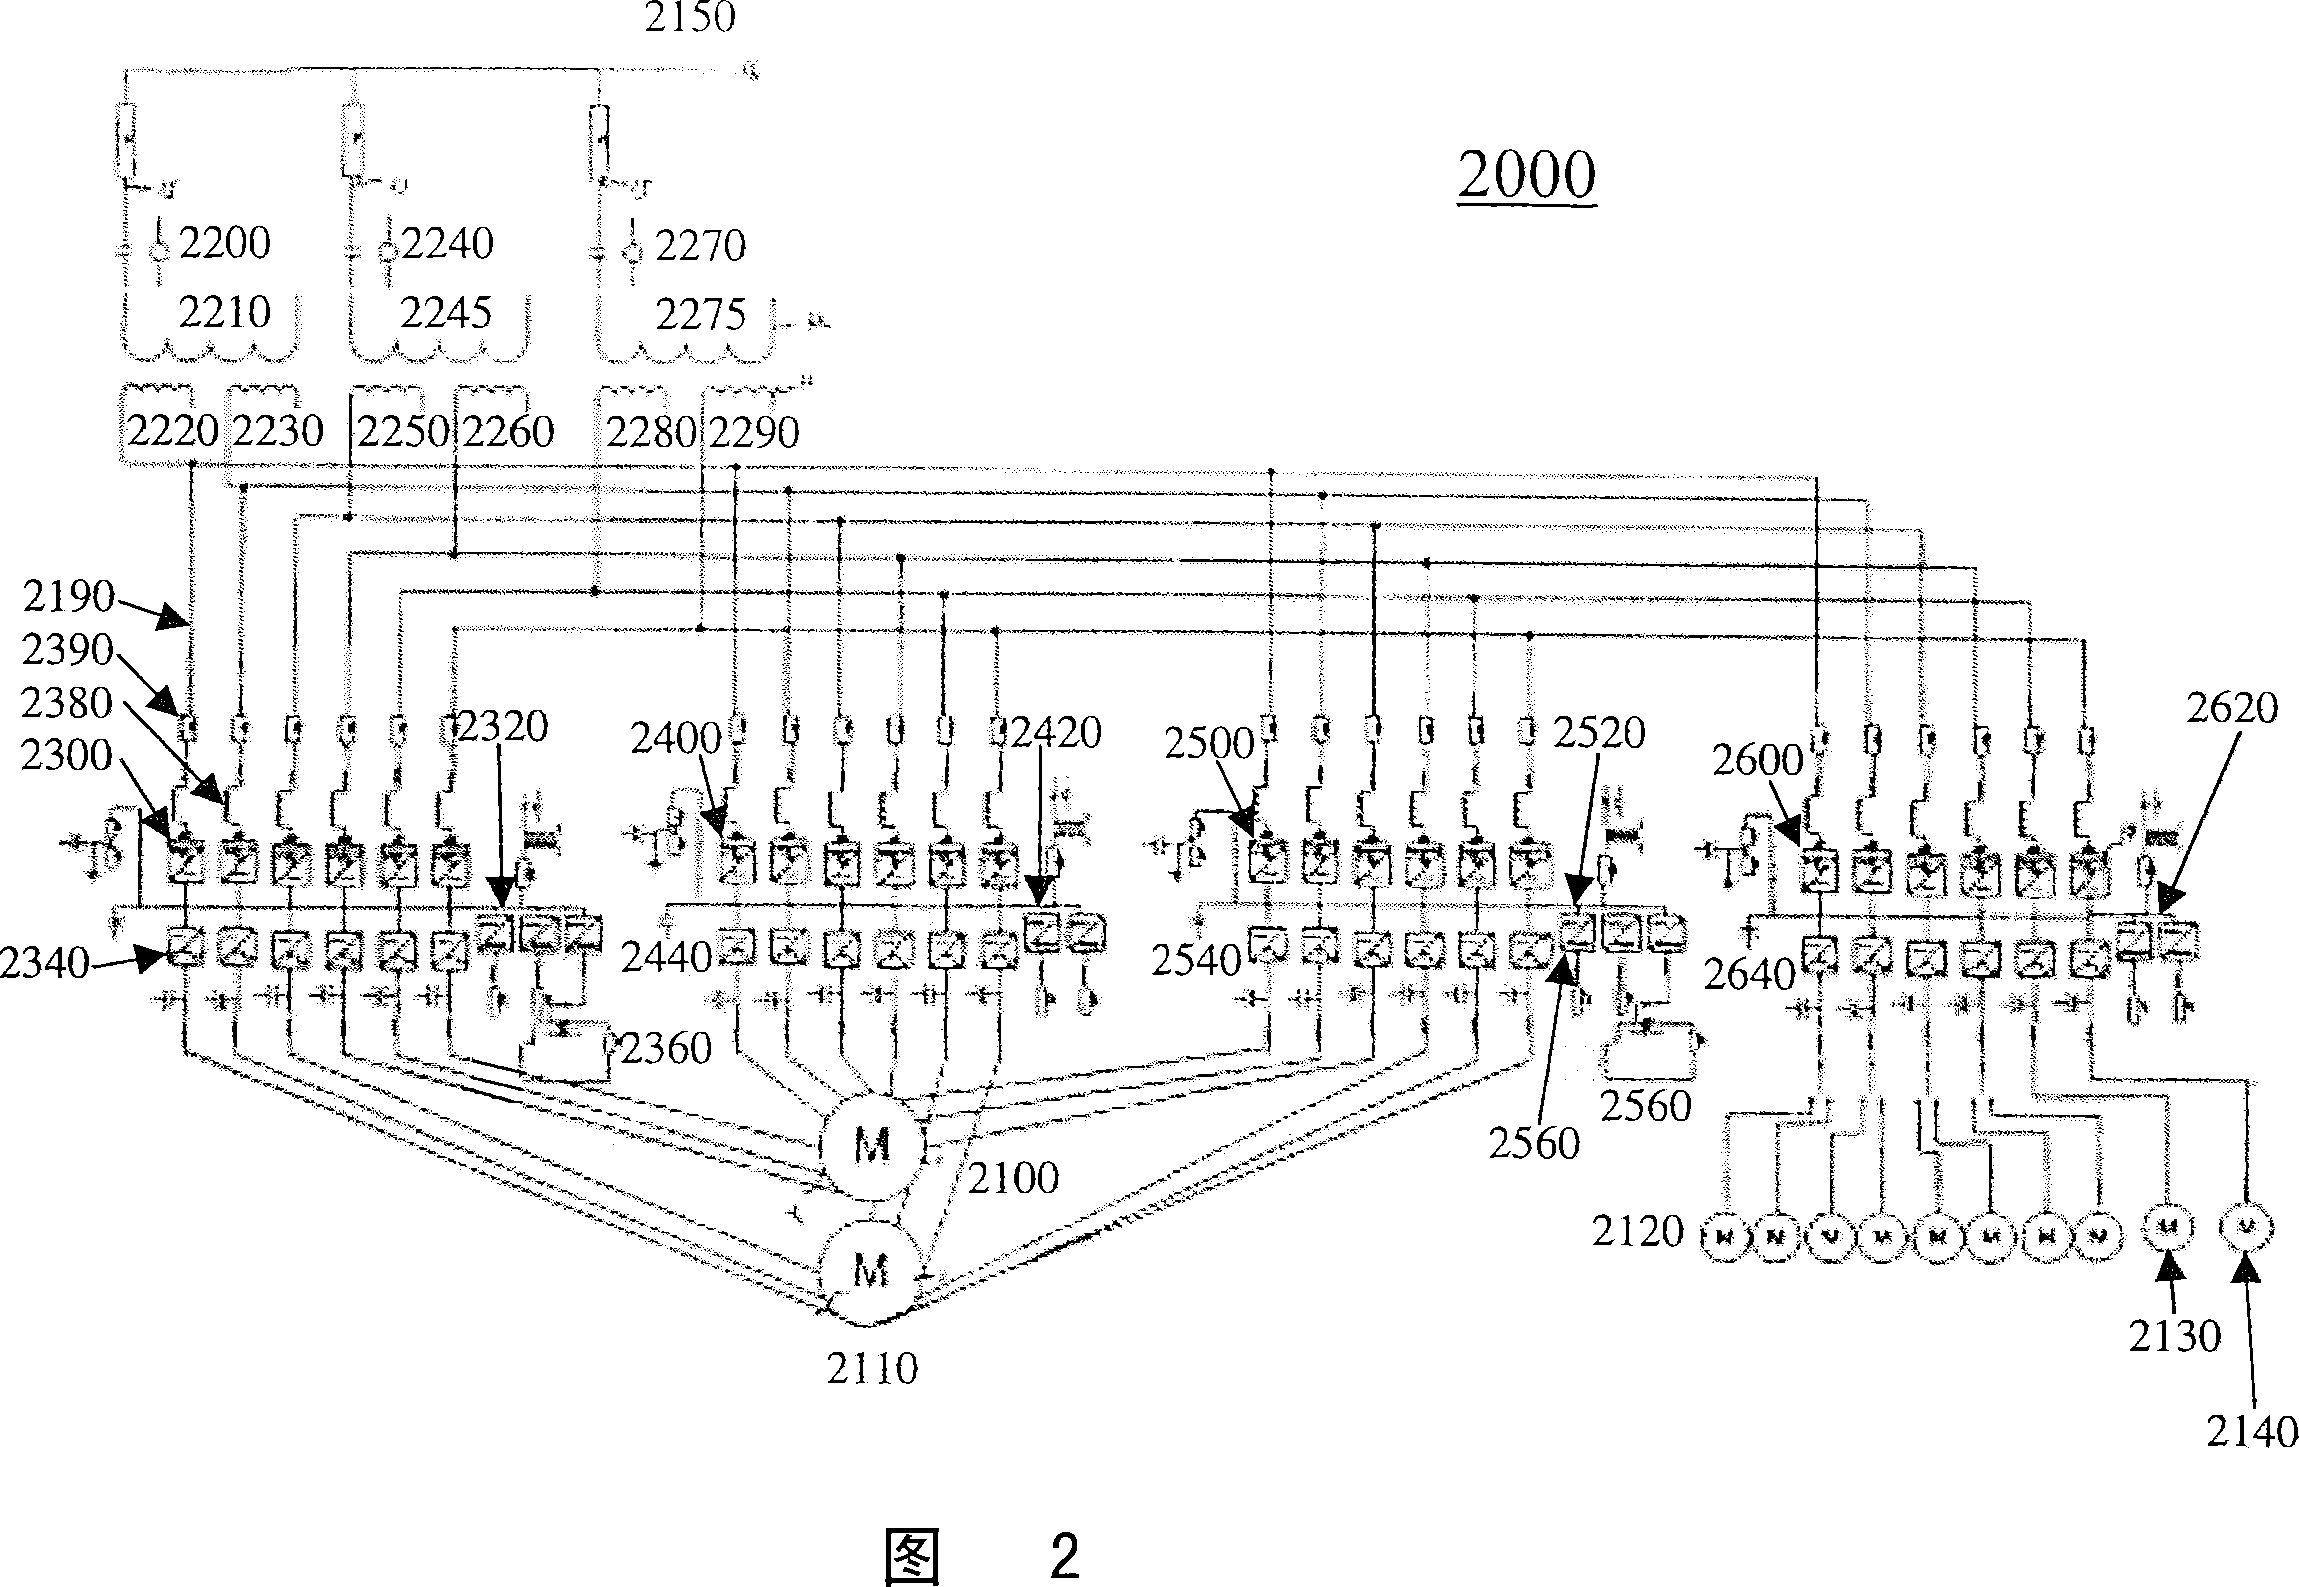 Systems for managing electrical power